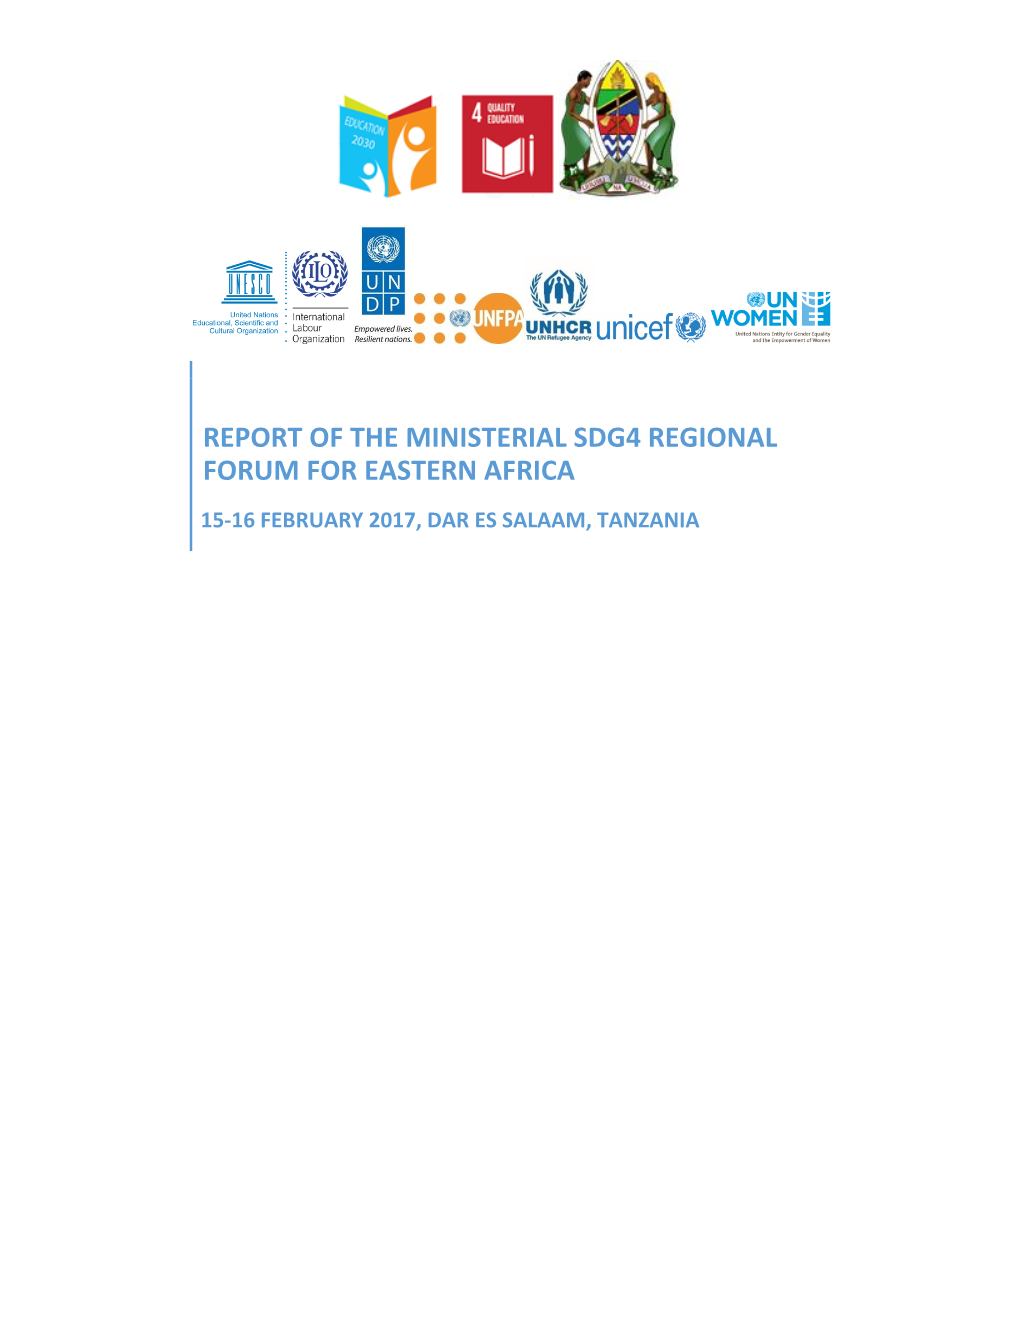 Report of the Ministerial Sdg4 Regional Forum for Eastern Africa 15-16 February 2017, Dar Es Salaam, Tanzania